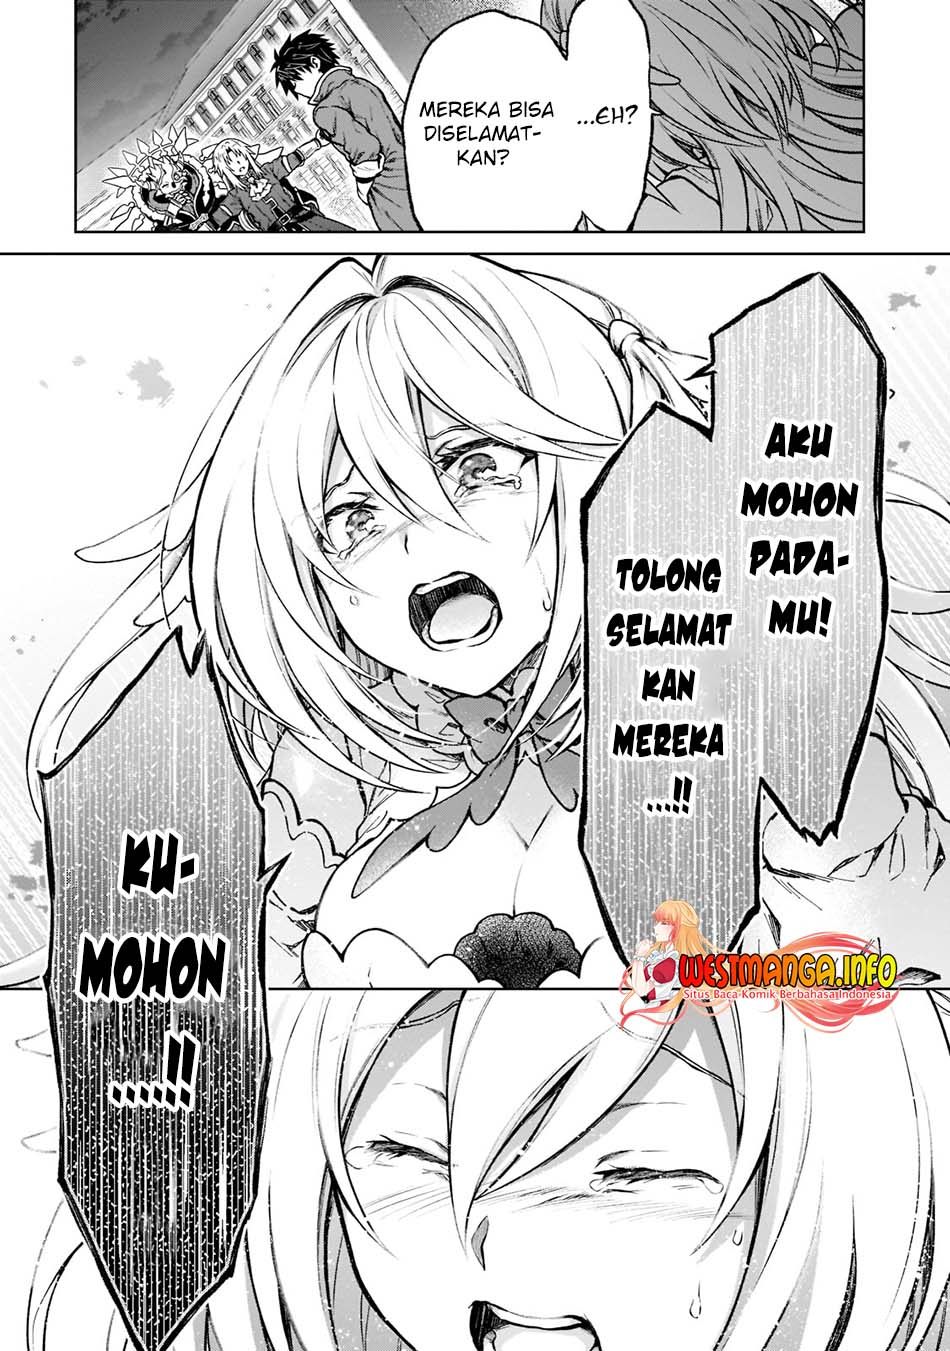 Dilarang COPAS - situs resmi www.mangacanblog.com - Komik d rank adventurer invited by a brave party and the stalking princess 011 - chapter 11 12 Indonesia d rank adventurer invited by a brave party and the stalking princess 011 - chapter 11 Terbaru 12|Baca Manga Komik Indonesia|Mangacan